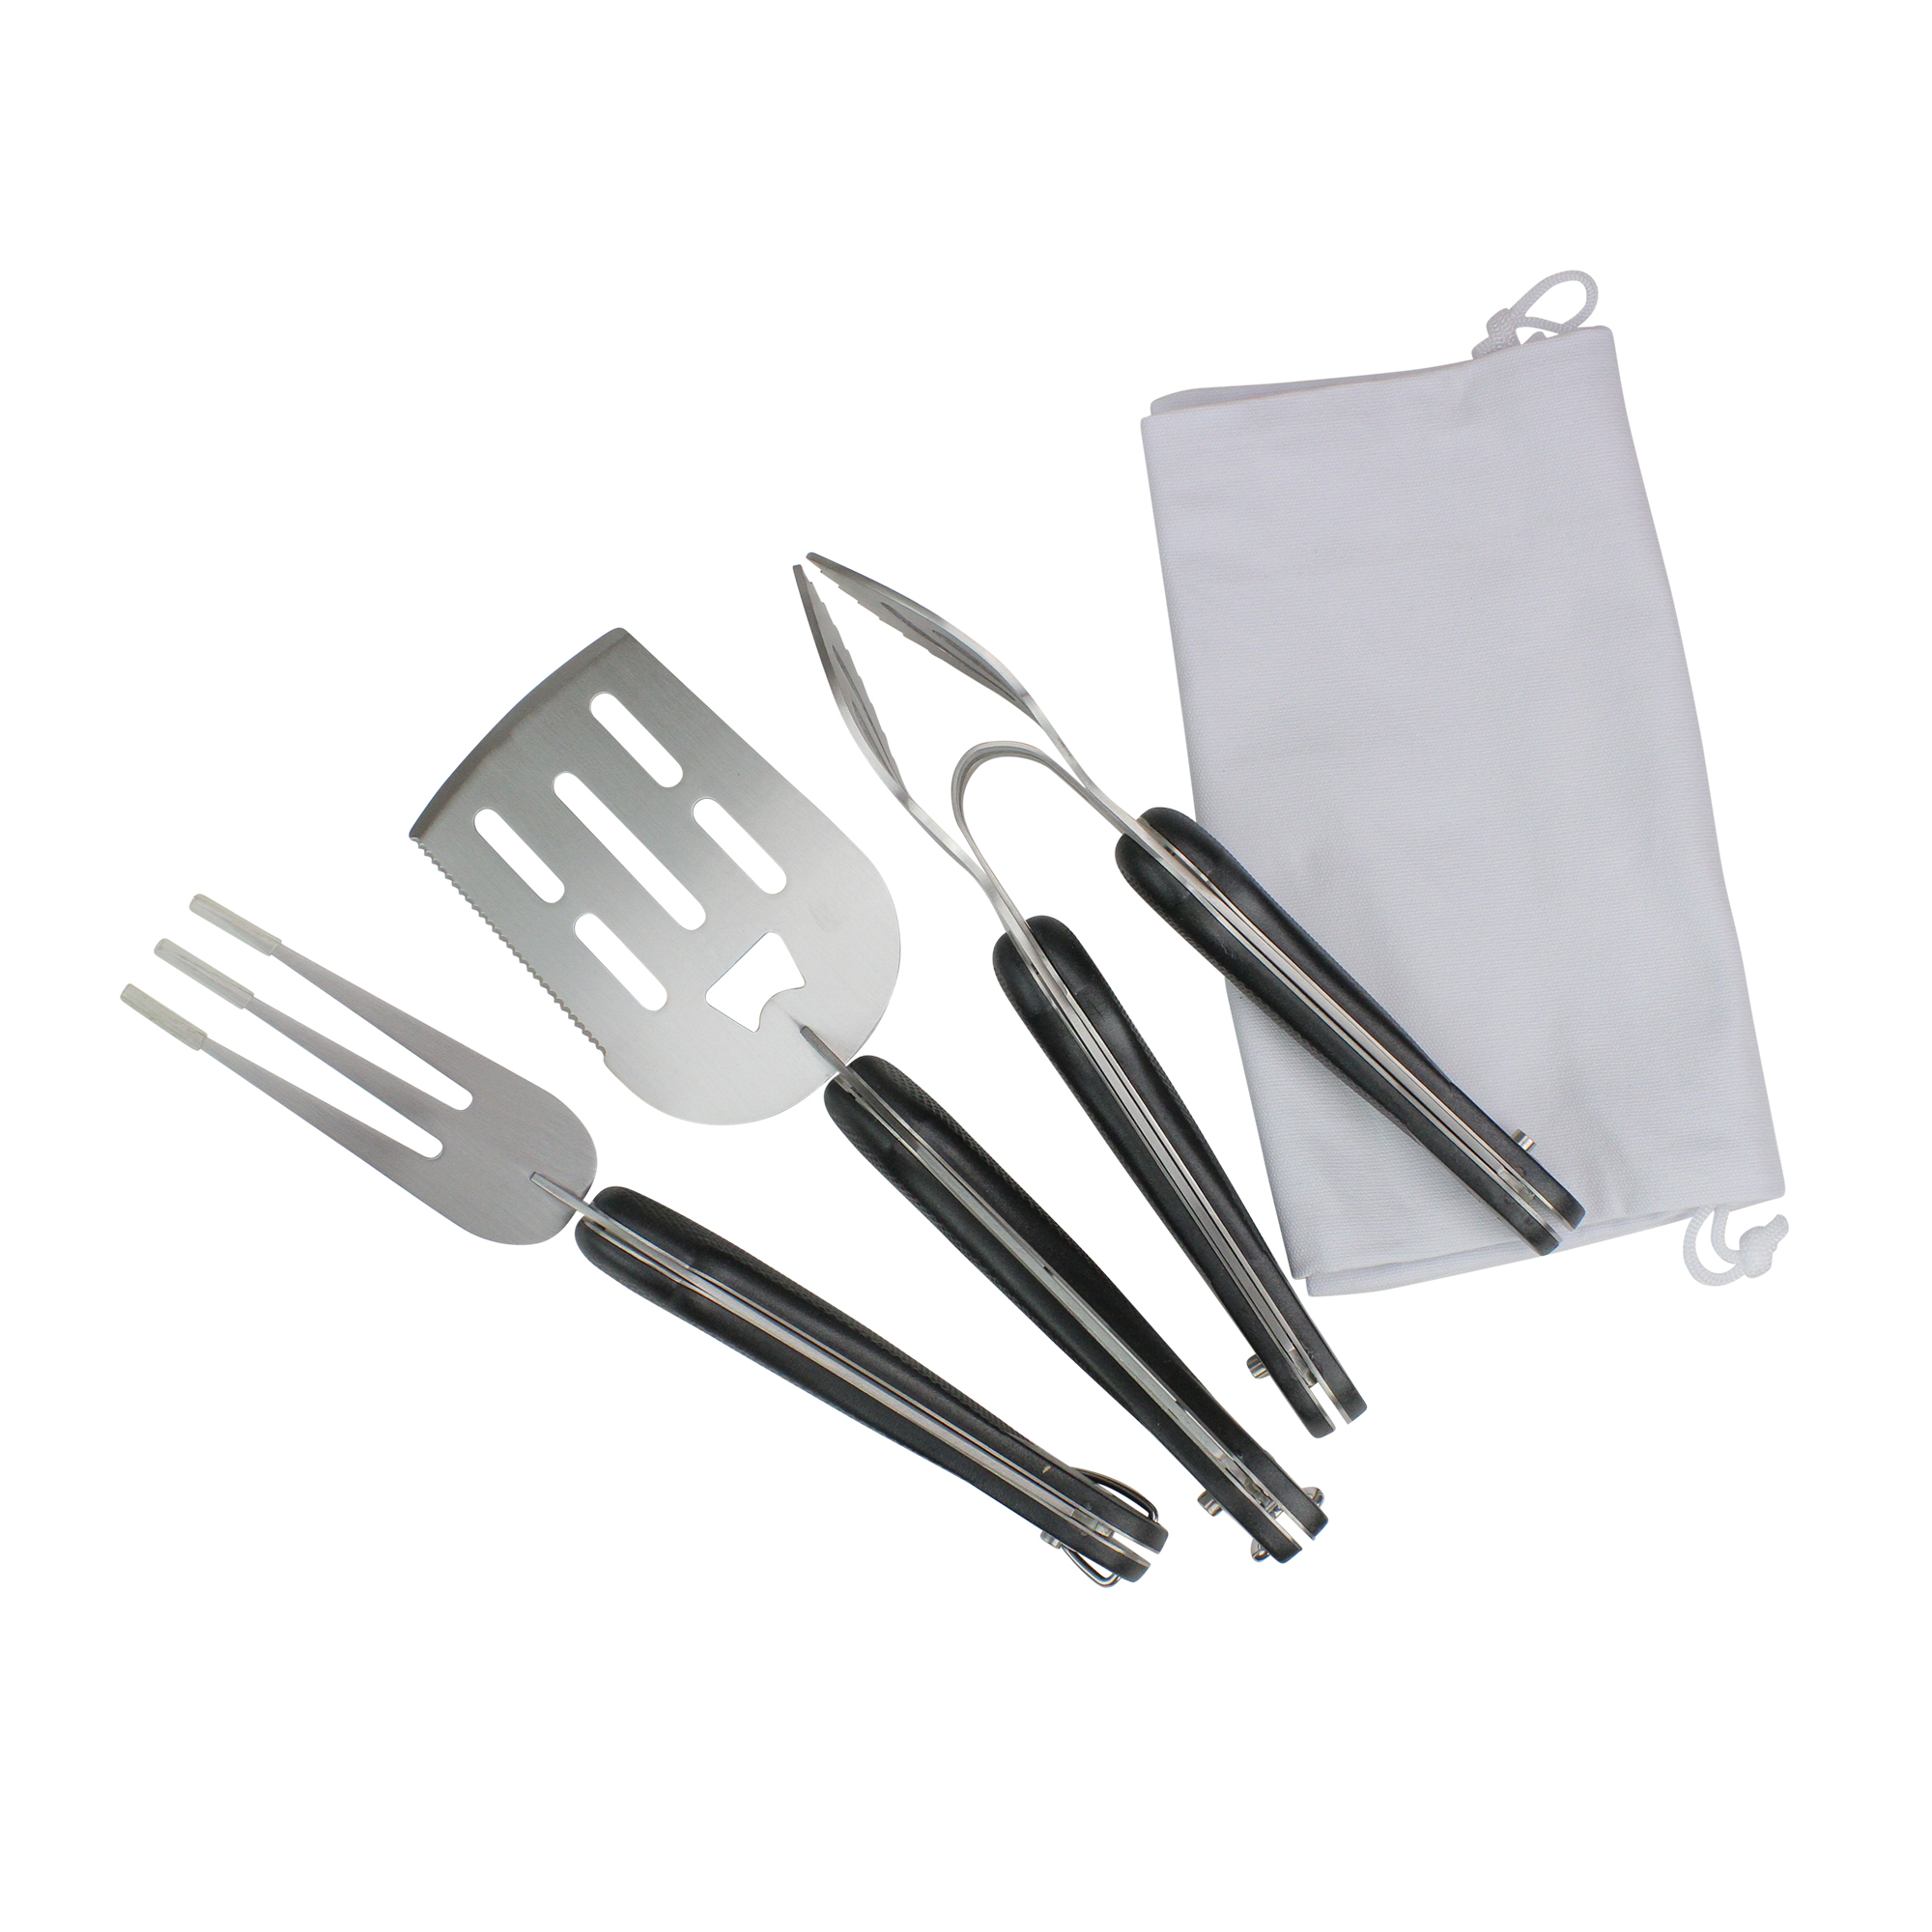 Avon Set of 3 Black and Silver Folding BBQ Tool Set 18" - image 1 of 3